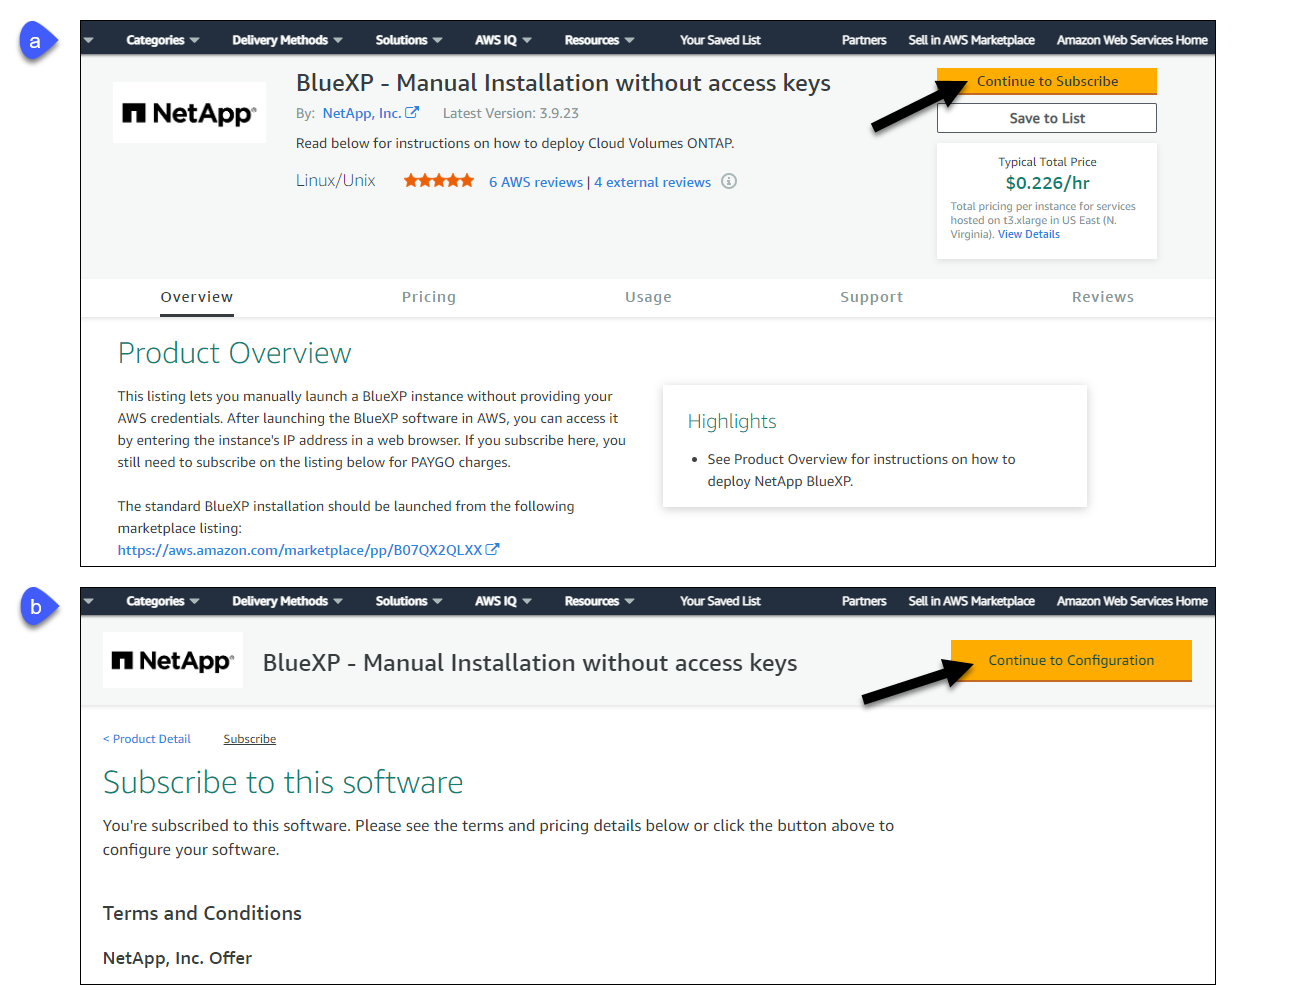 AWS Marketplace の Continue to Subscribe and Continue to Configuration ボタンを示すスクリーンショット